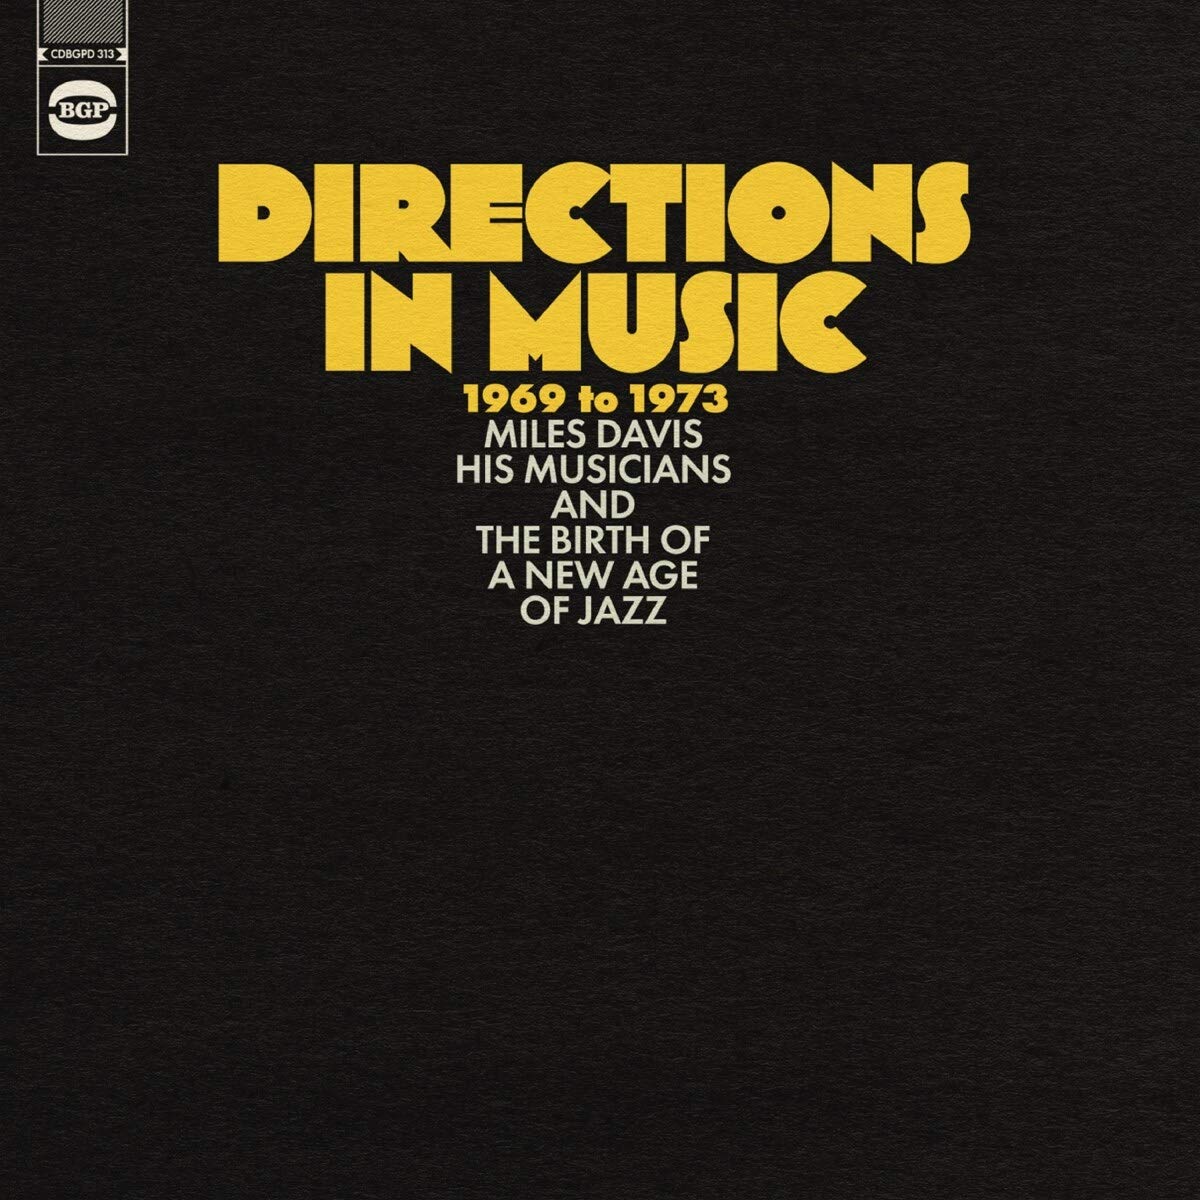 VARIOUS - Directions In Music 1969 To 1973 - 2LP - Vinyl